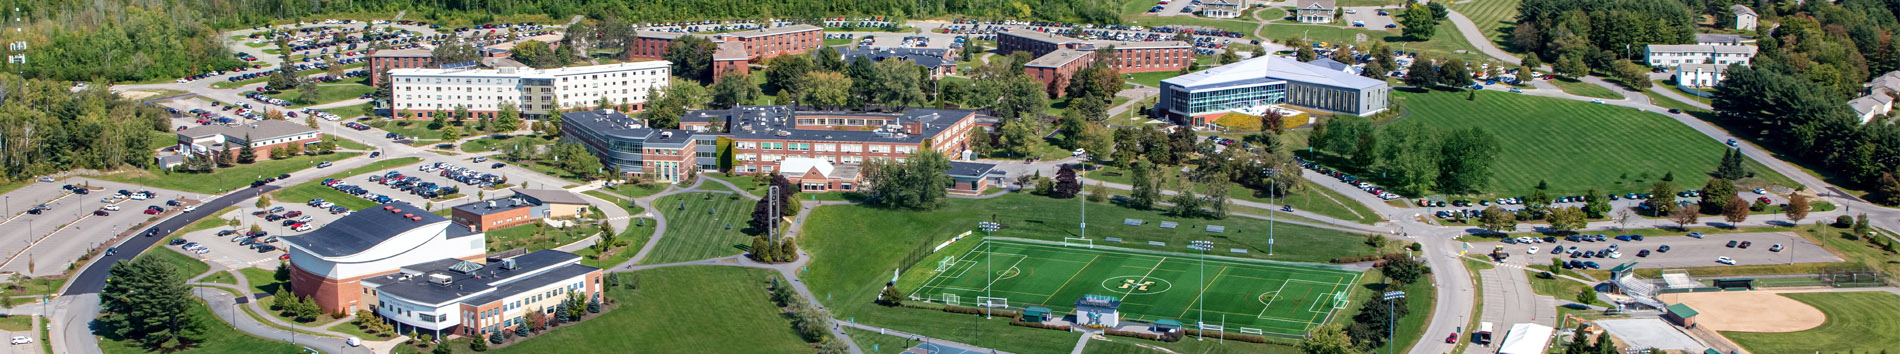 aerial view of the Husson University campus